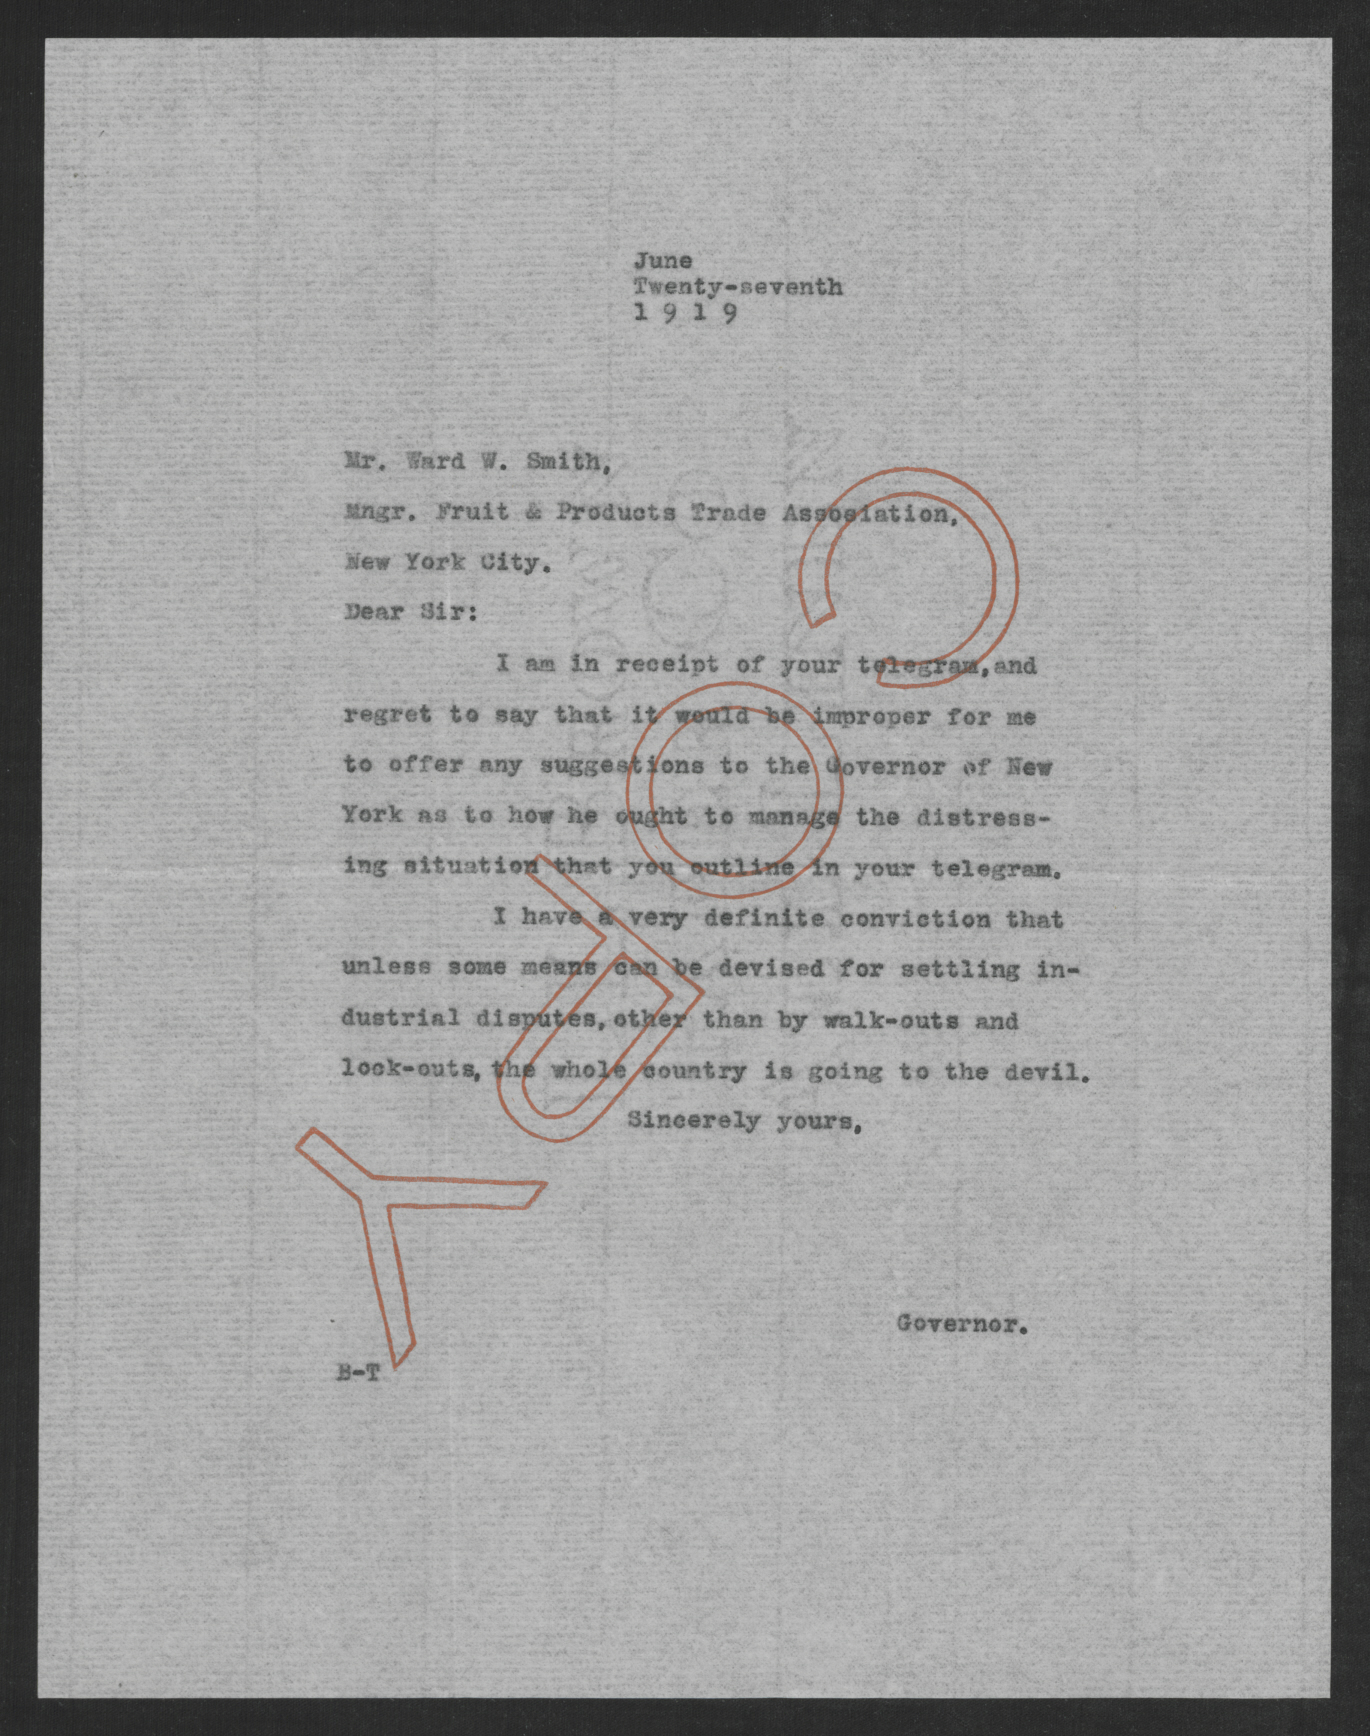 Letter from Thomas W. Bickett to Ward W. Smith, June 27, 1919